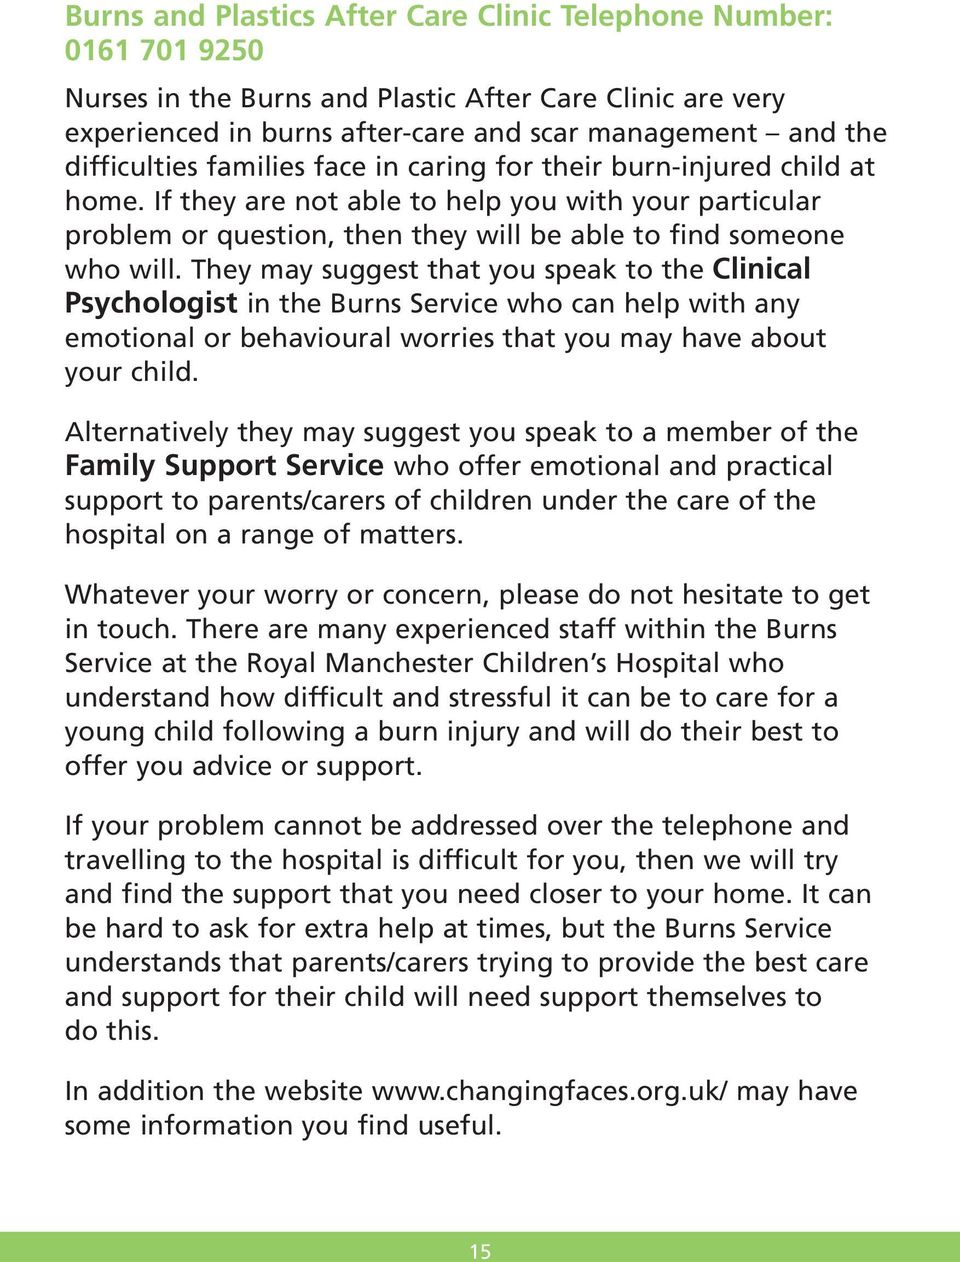 They may suggest that you speak to the Clinical Psychologist in the Burns Service who can help with any emotional or behavioural worries that you may have about your child.